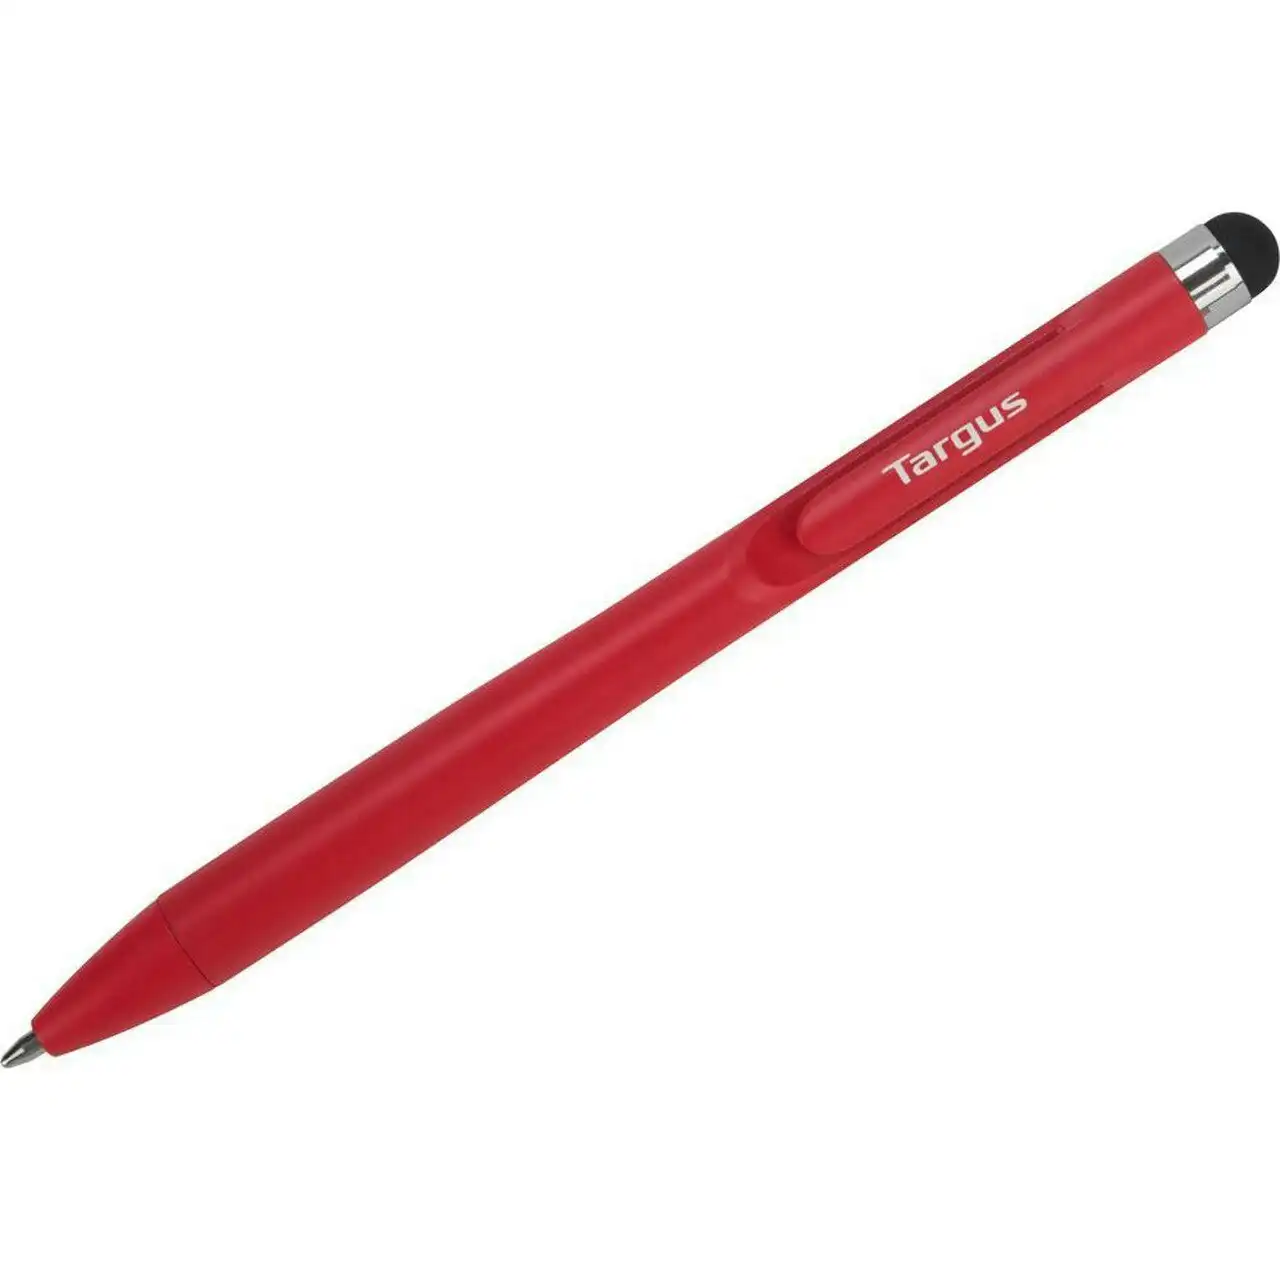 Targus Smooth Glide Stylus Pen w/ Rubber Tip For All Touch Screen Surfaces Red